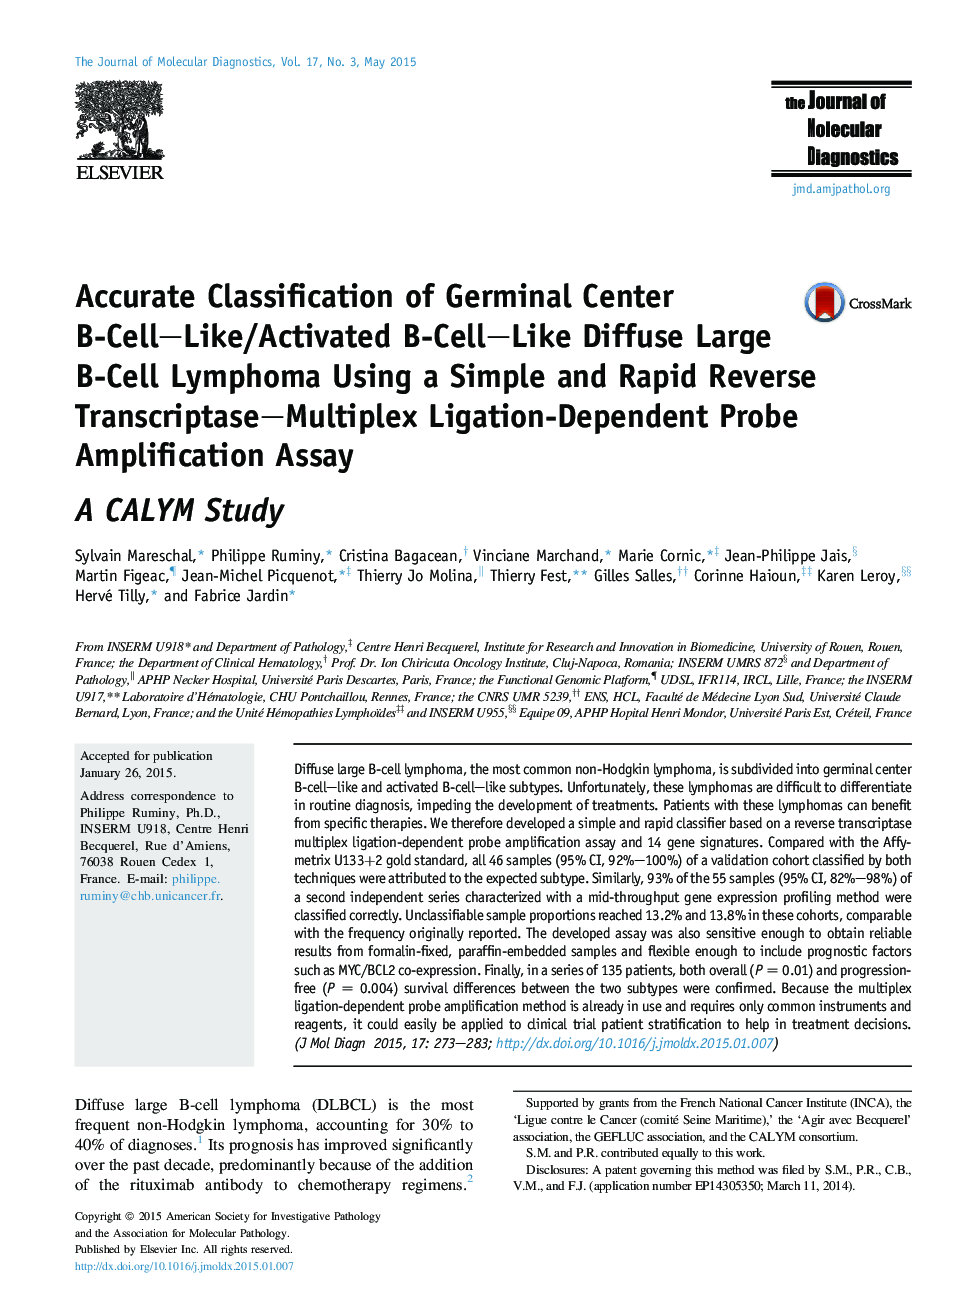 Regular articleAccurate Classification of Germinal Center B-Cell-Like/Activated B-Cell-Like Diffuse Large B-Cell Lymphoma Using a Simple and Rapid Reverse Transcriptase-Multiplex Ligation-Dependent Probe Amplification Assay: A CALYM Study